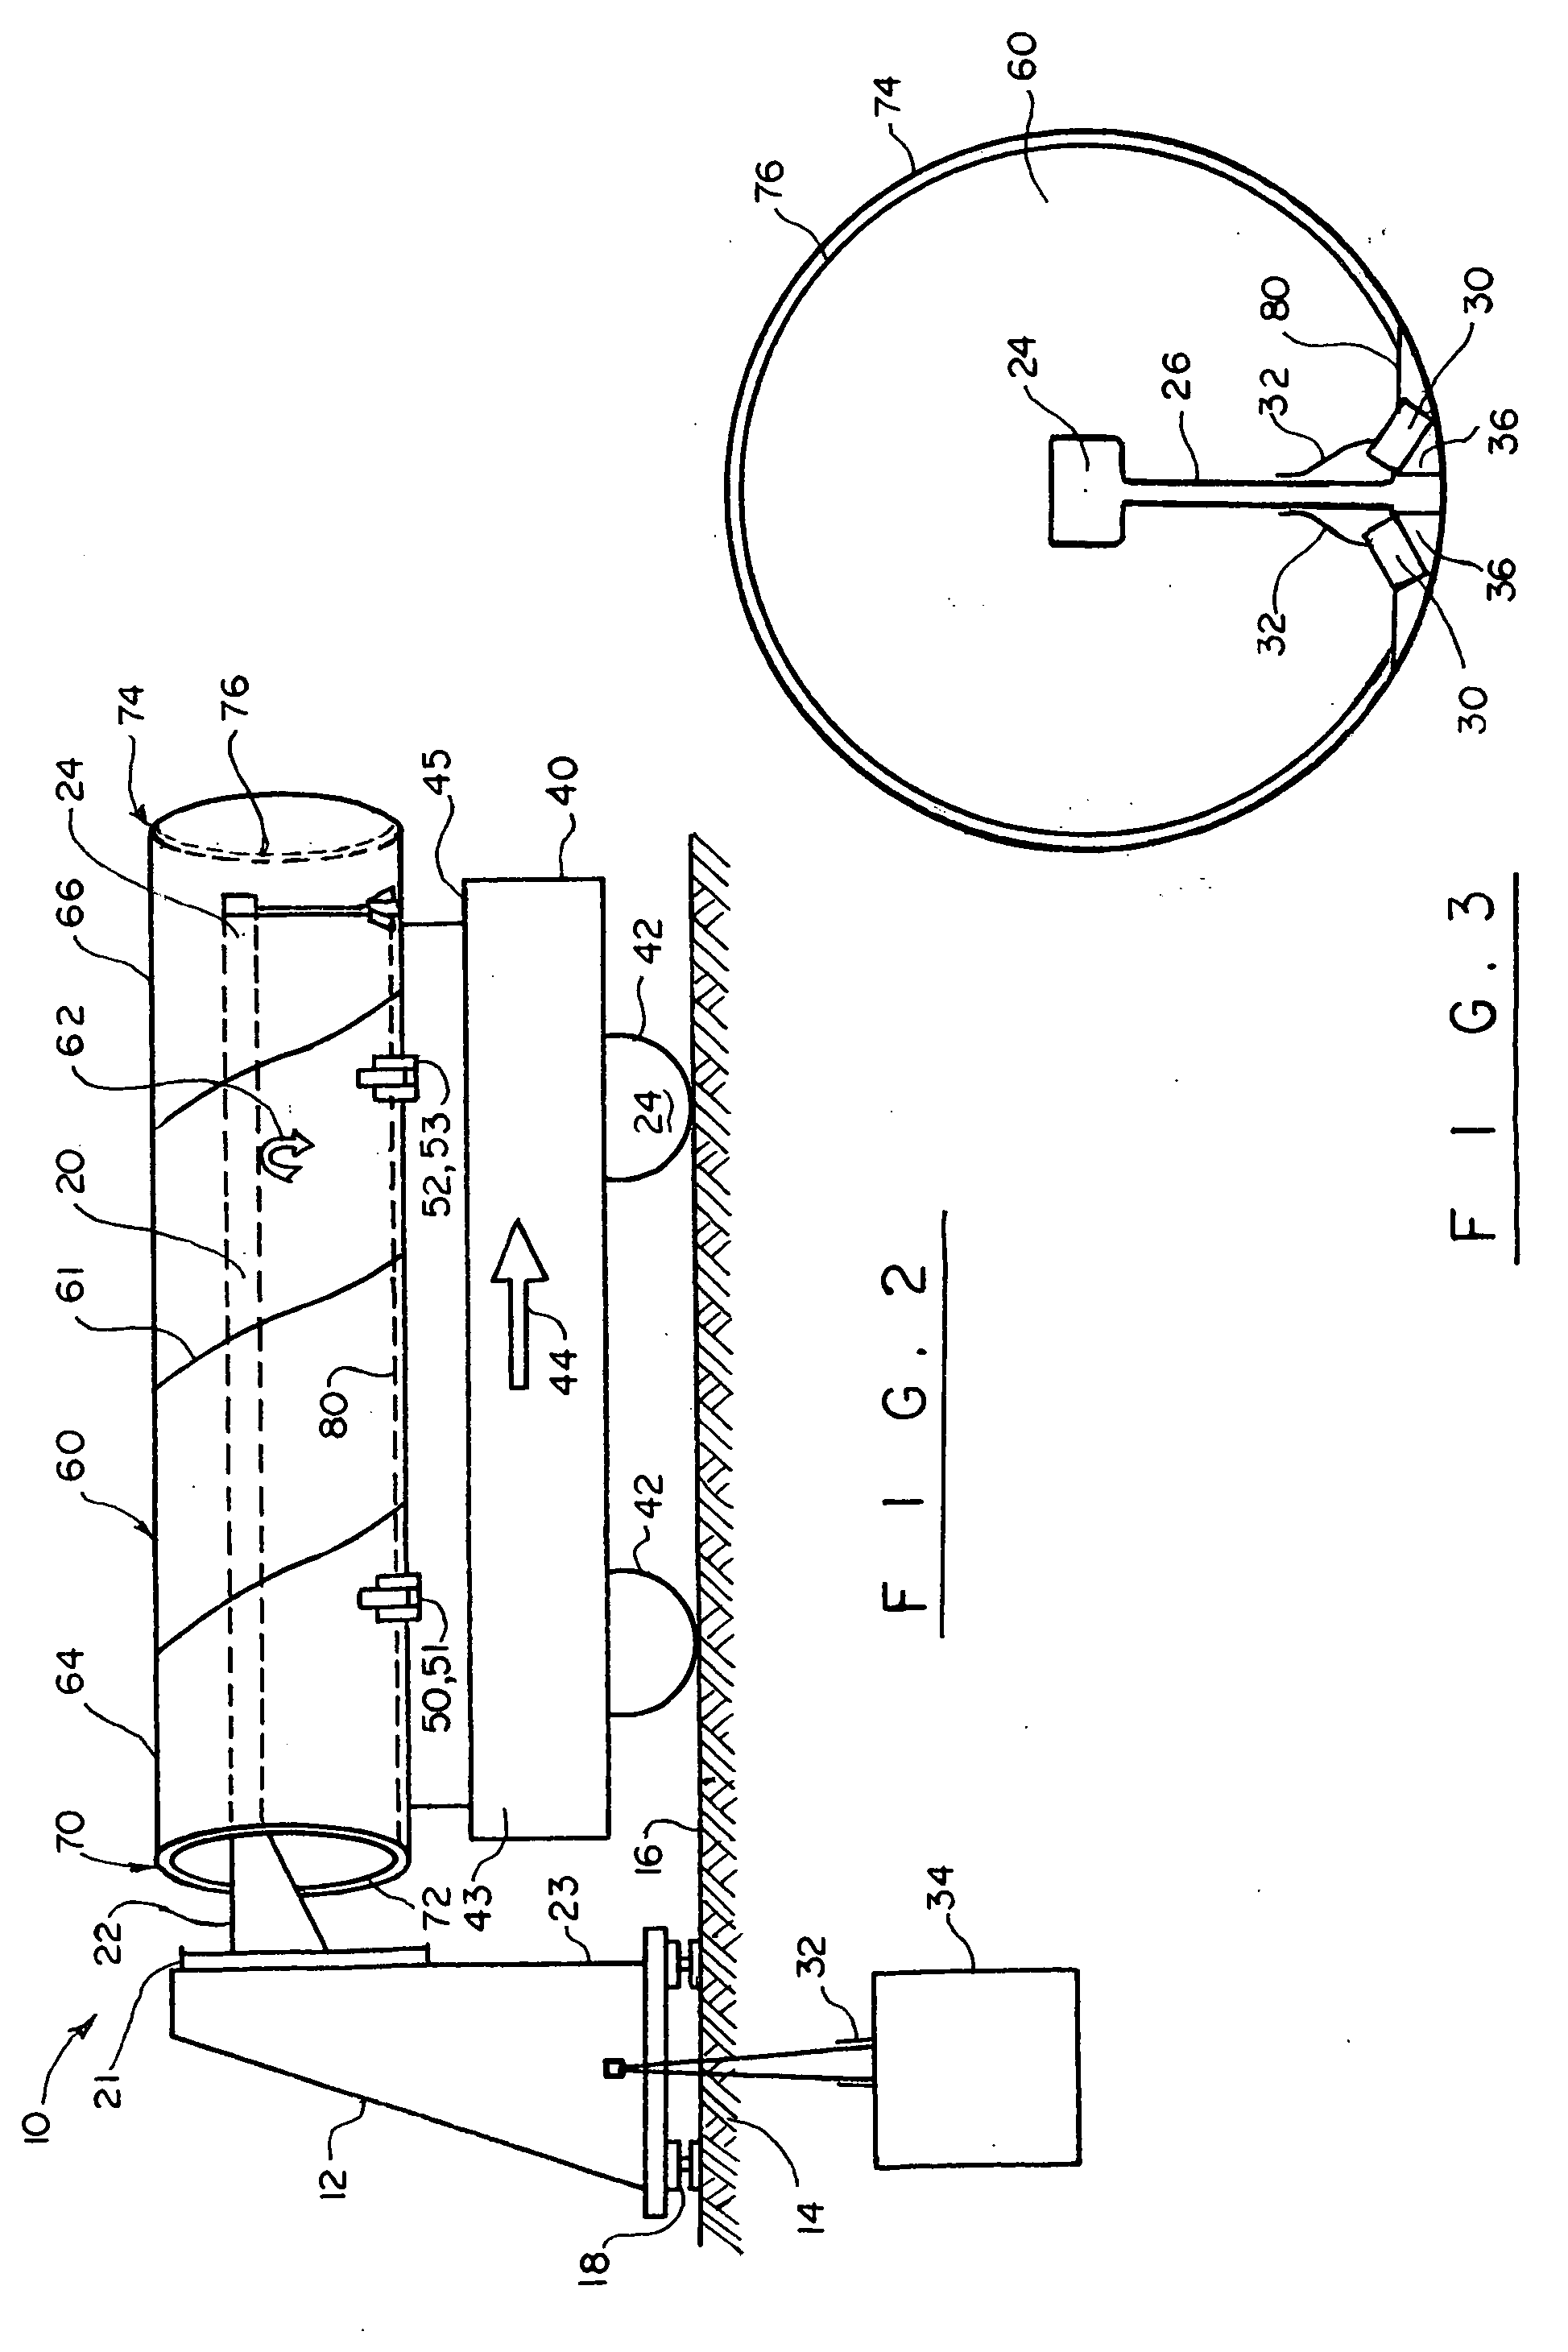 Inspection apparatus for tubular members